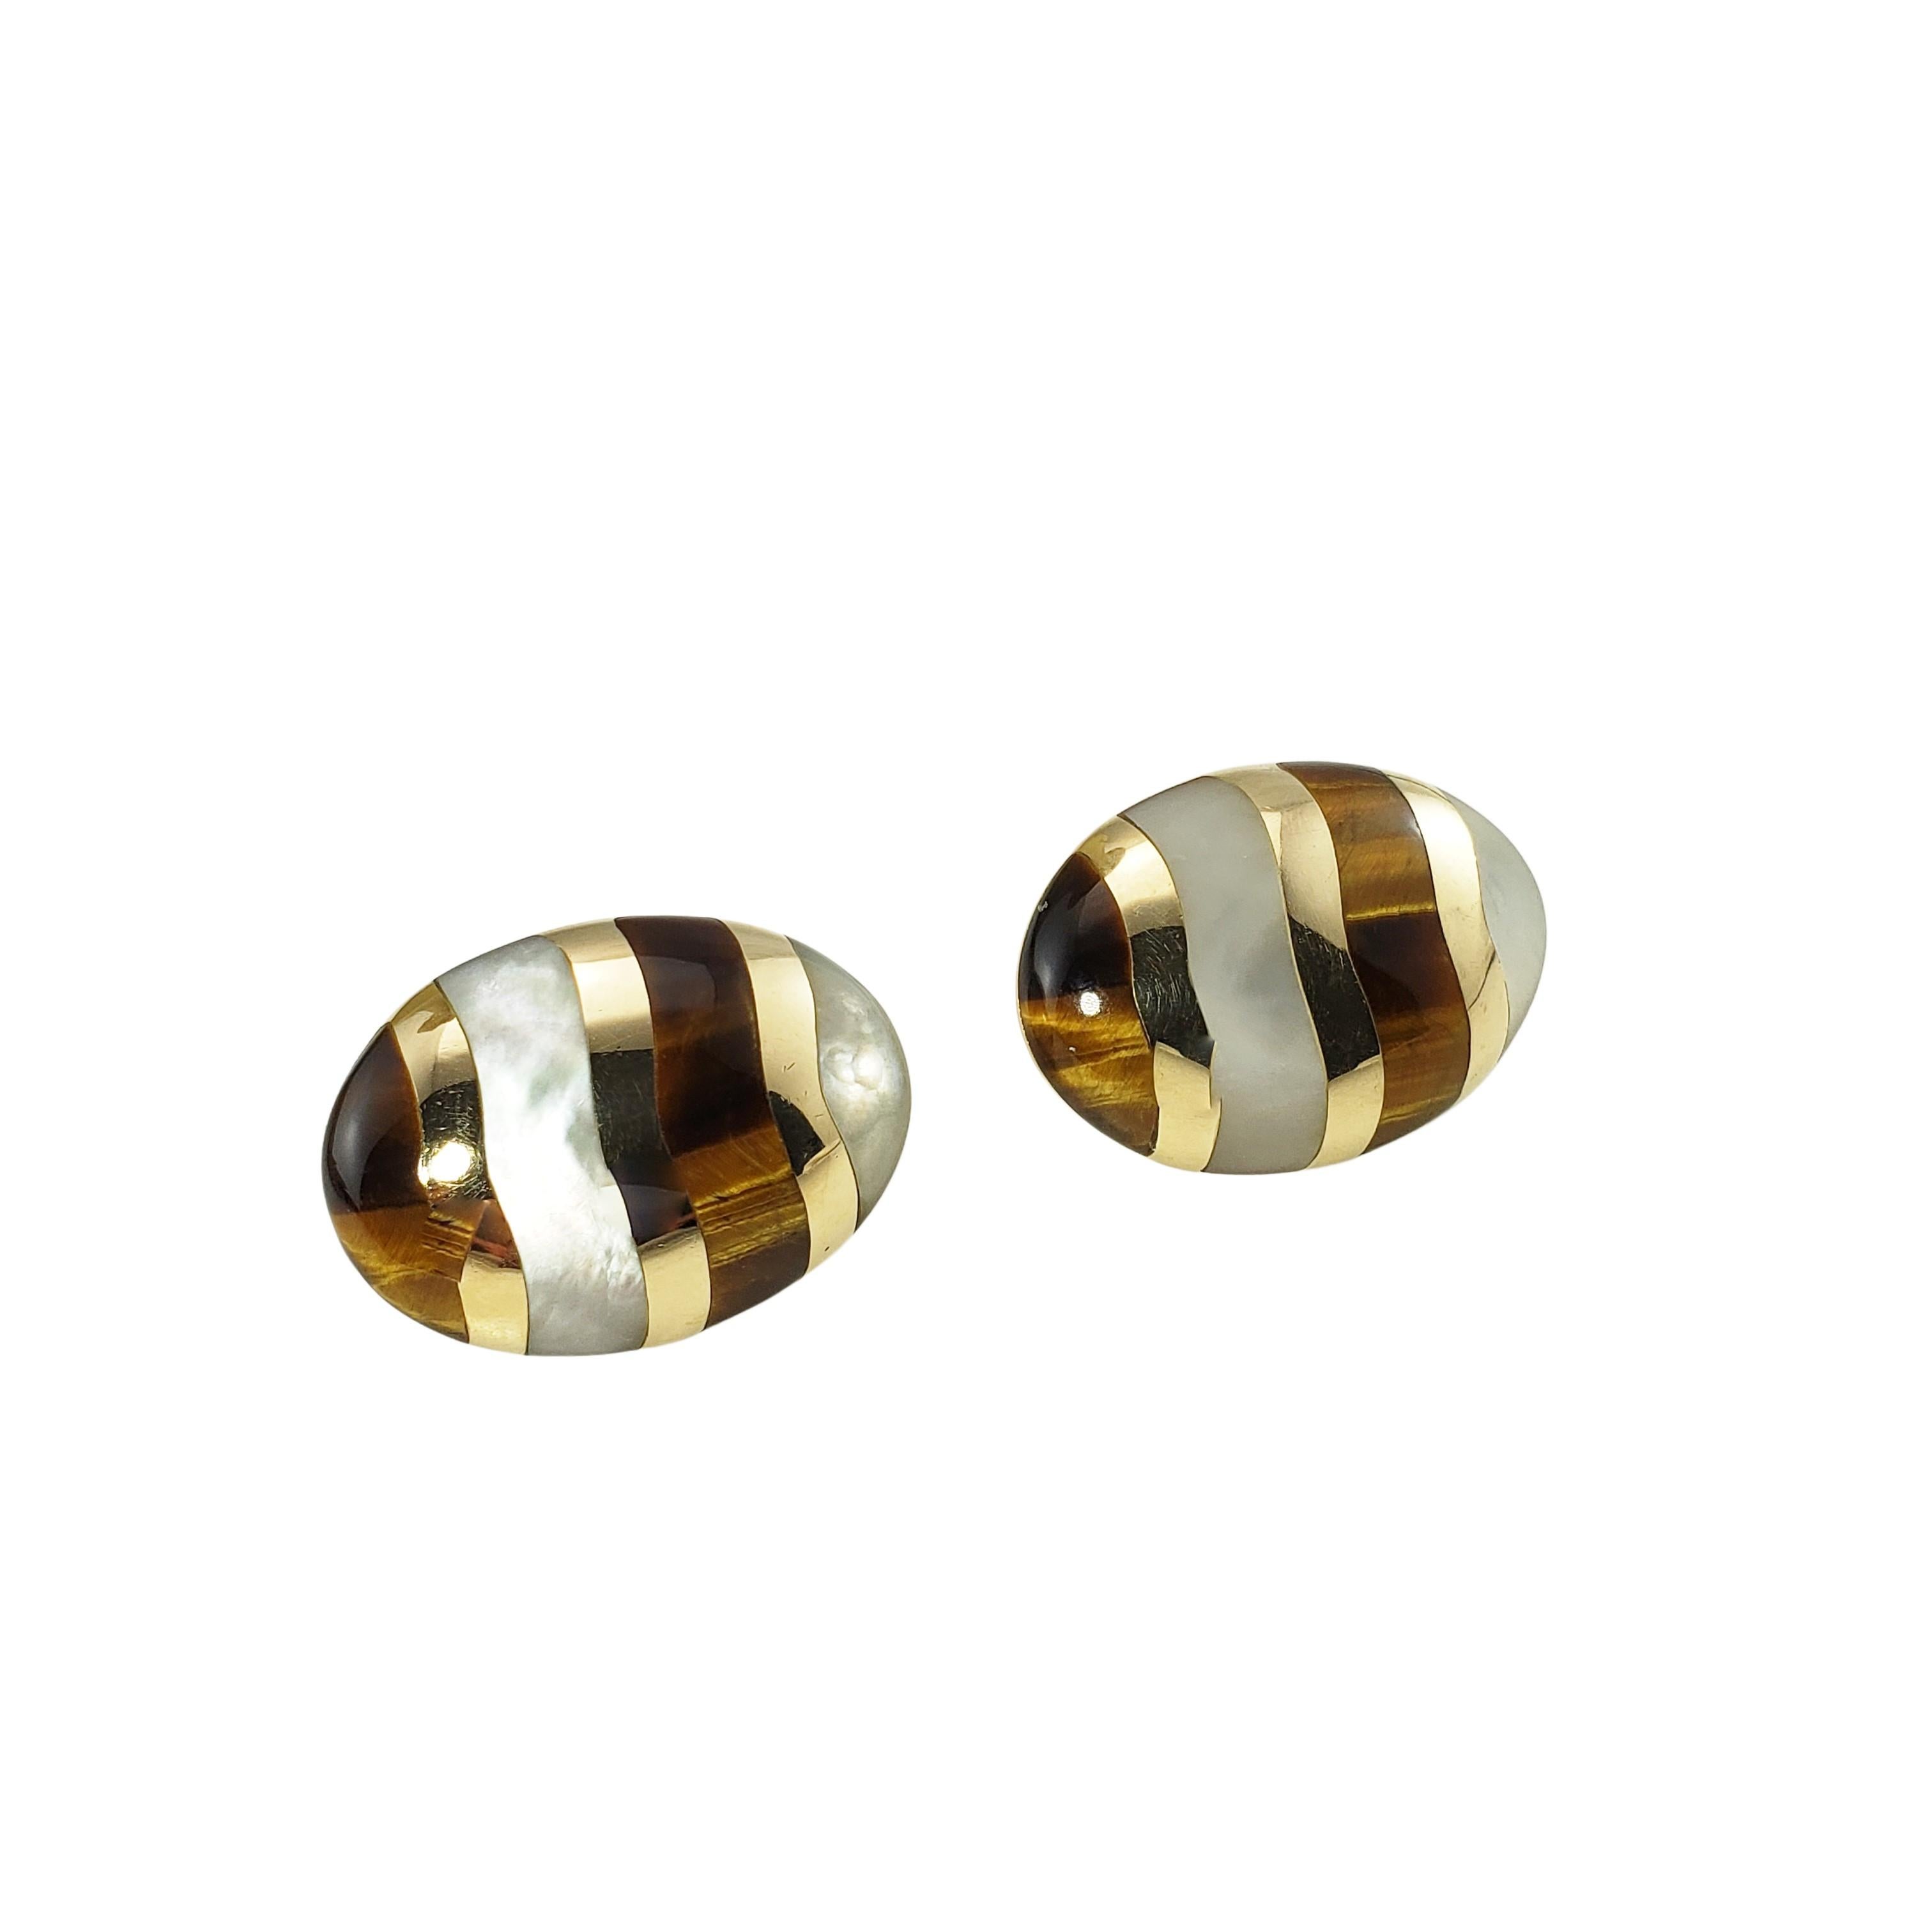 14 Karat Yellow Gold Tiger's Eye and Mother of Pearl Earrings-

These lovely earrings each features tiger's eye and mother of pearl set in beautifully detailed 14K yellow gold.

Size: 29 mm x 21 mm 

Weight:  11.7 dwt. /  18.3 gr.

Stamped: 14K